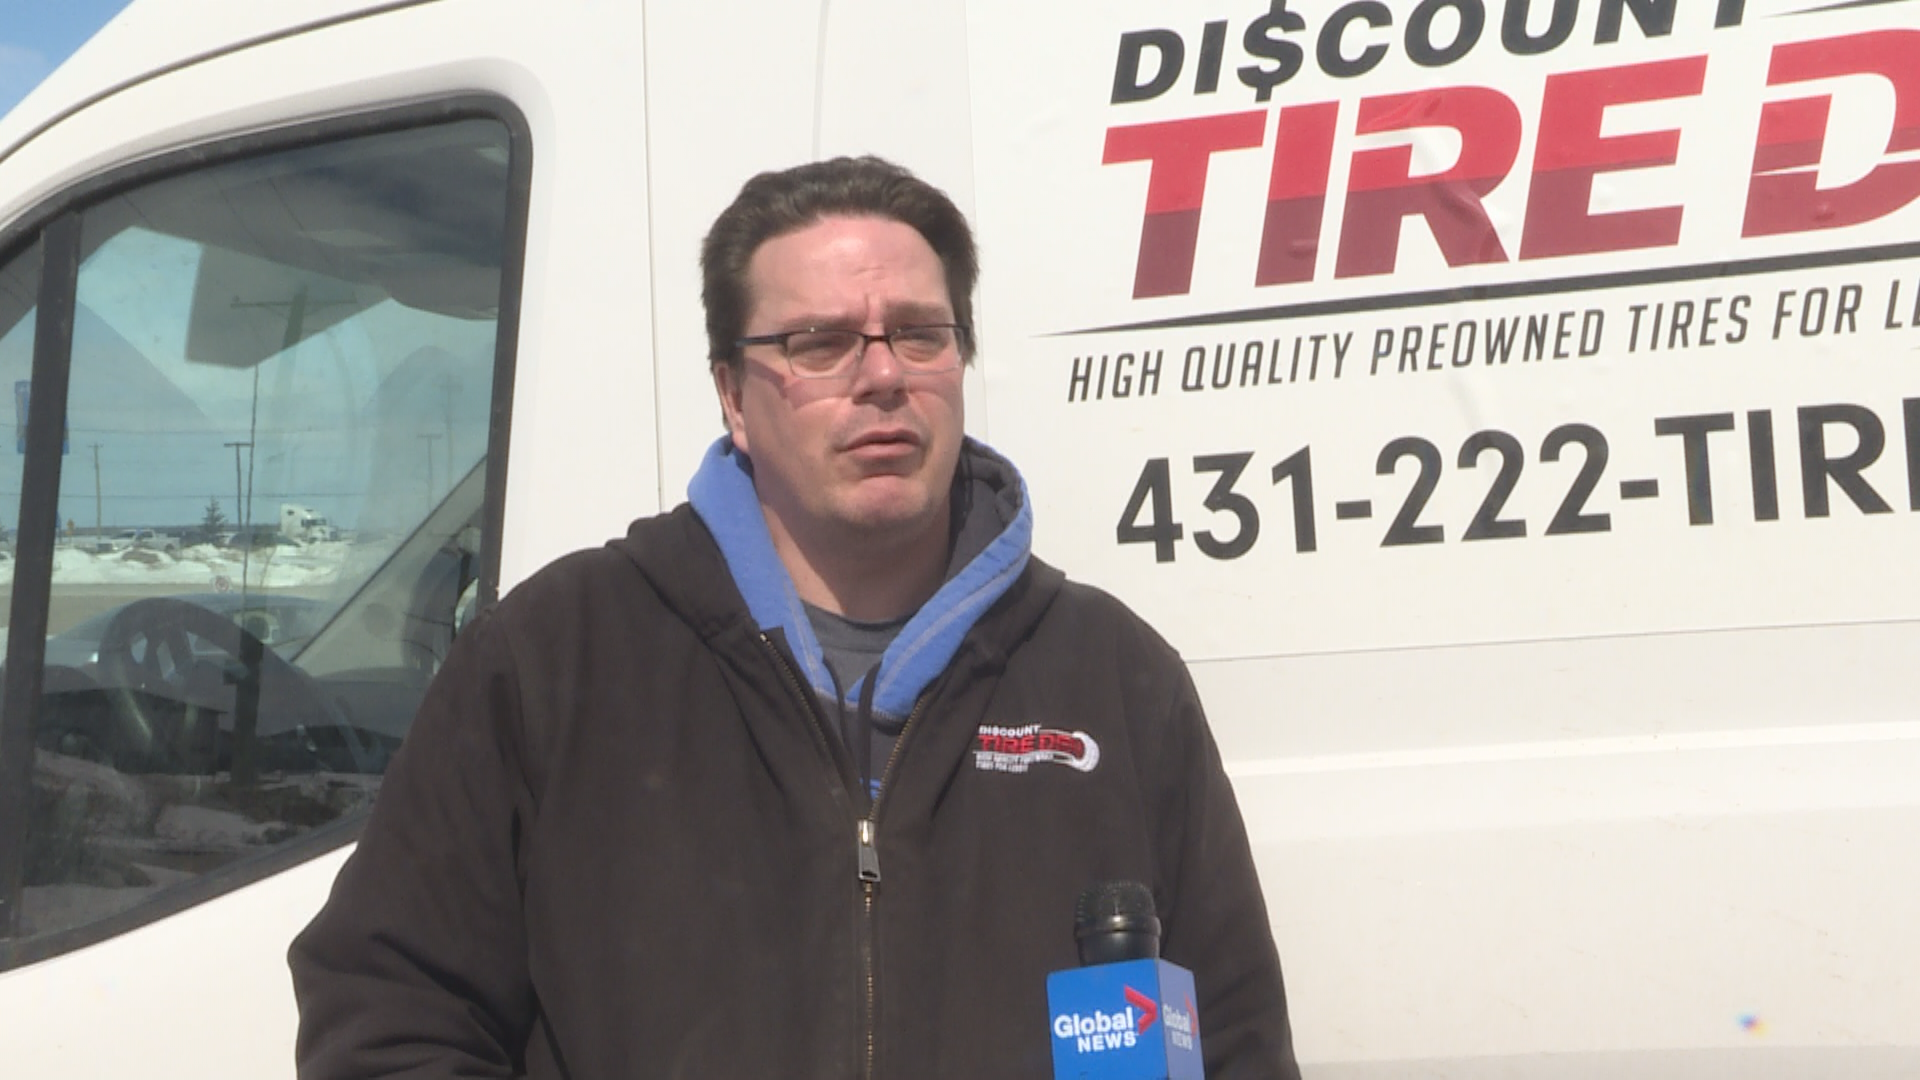 Jeff Landry, with Discount Tire Den in Headingley, says rising inflation coupled with pandemic-related supply chain disruptions have drastically increasing demand for used tires.